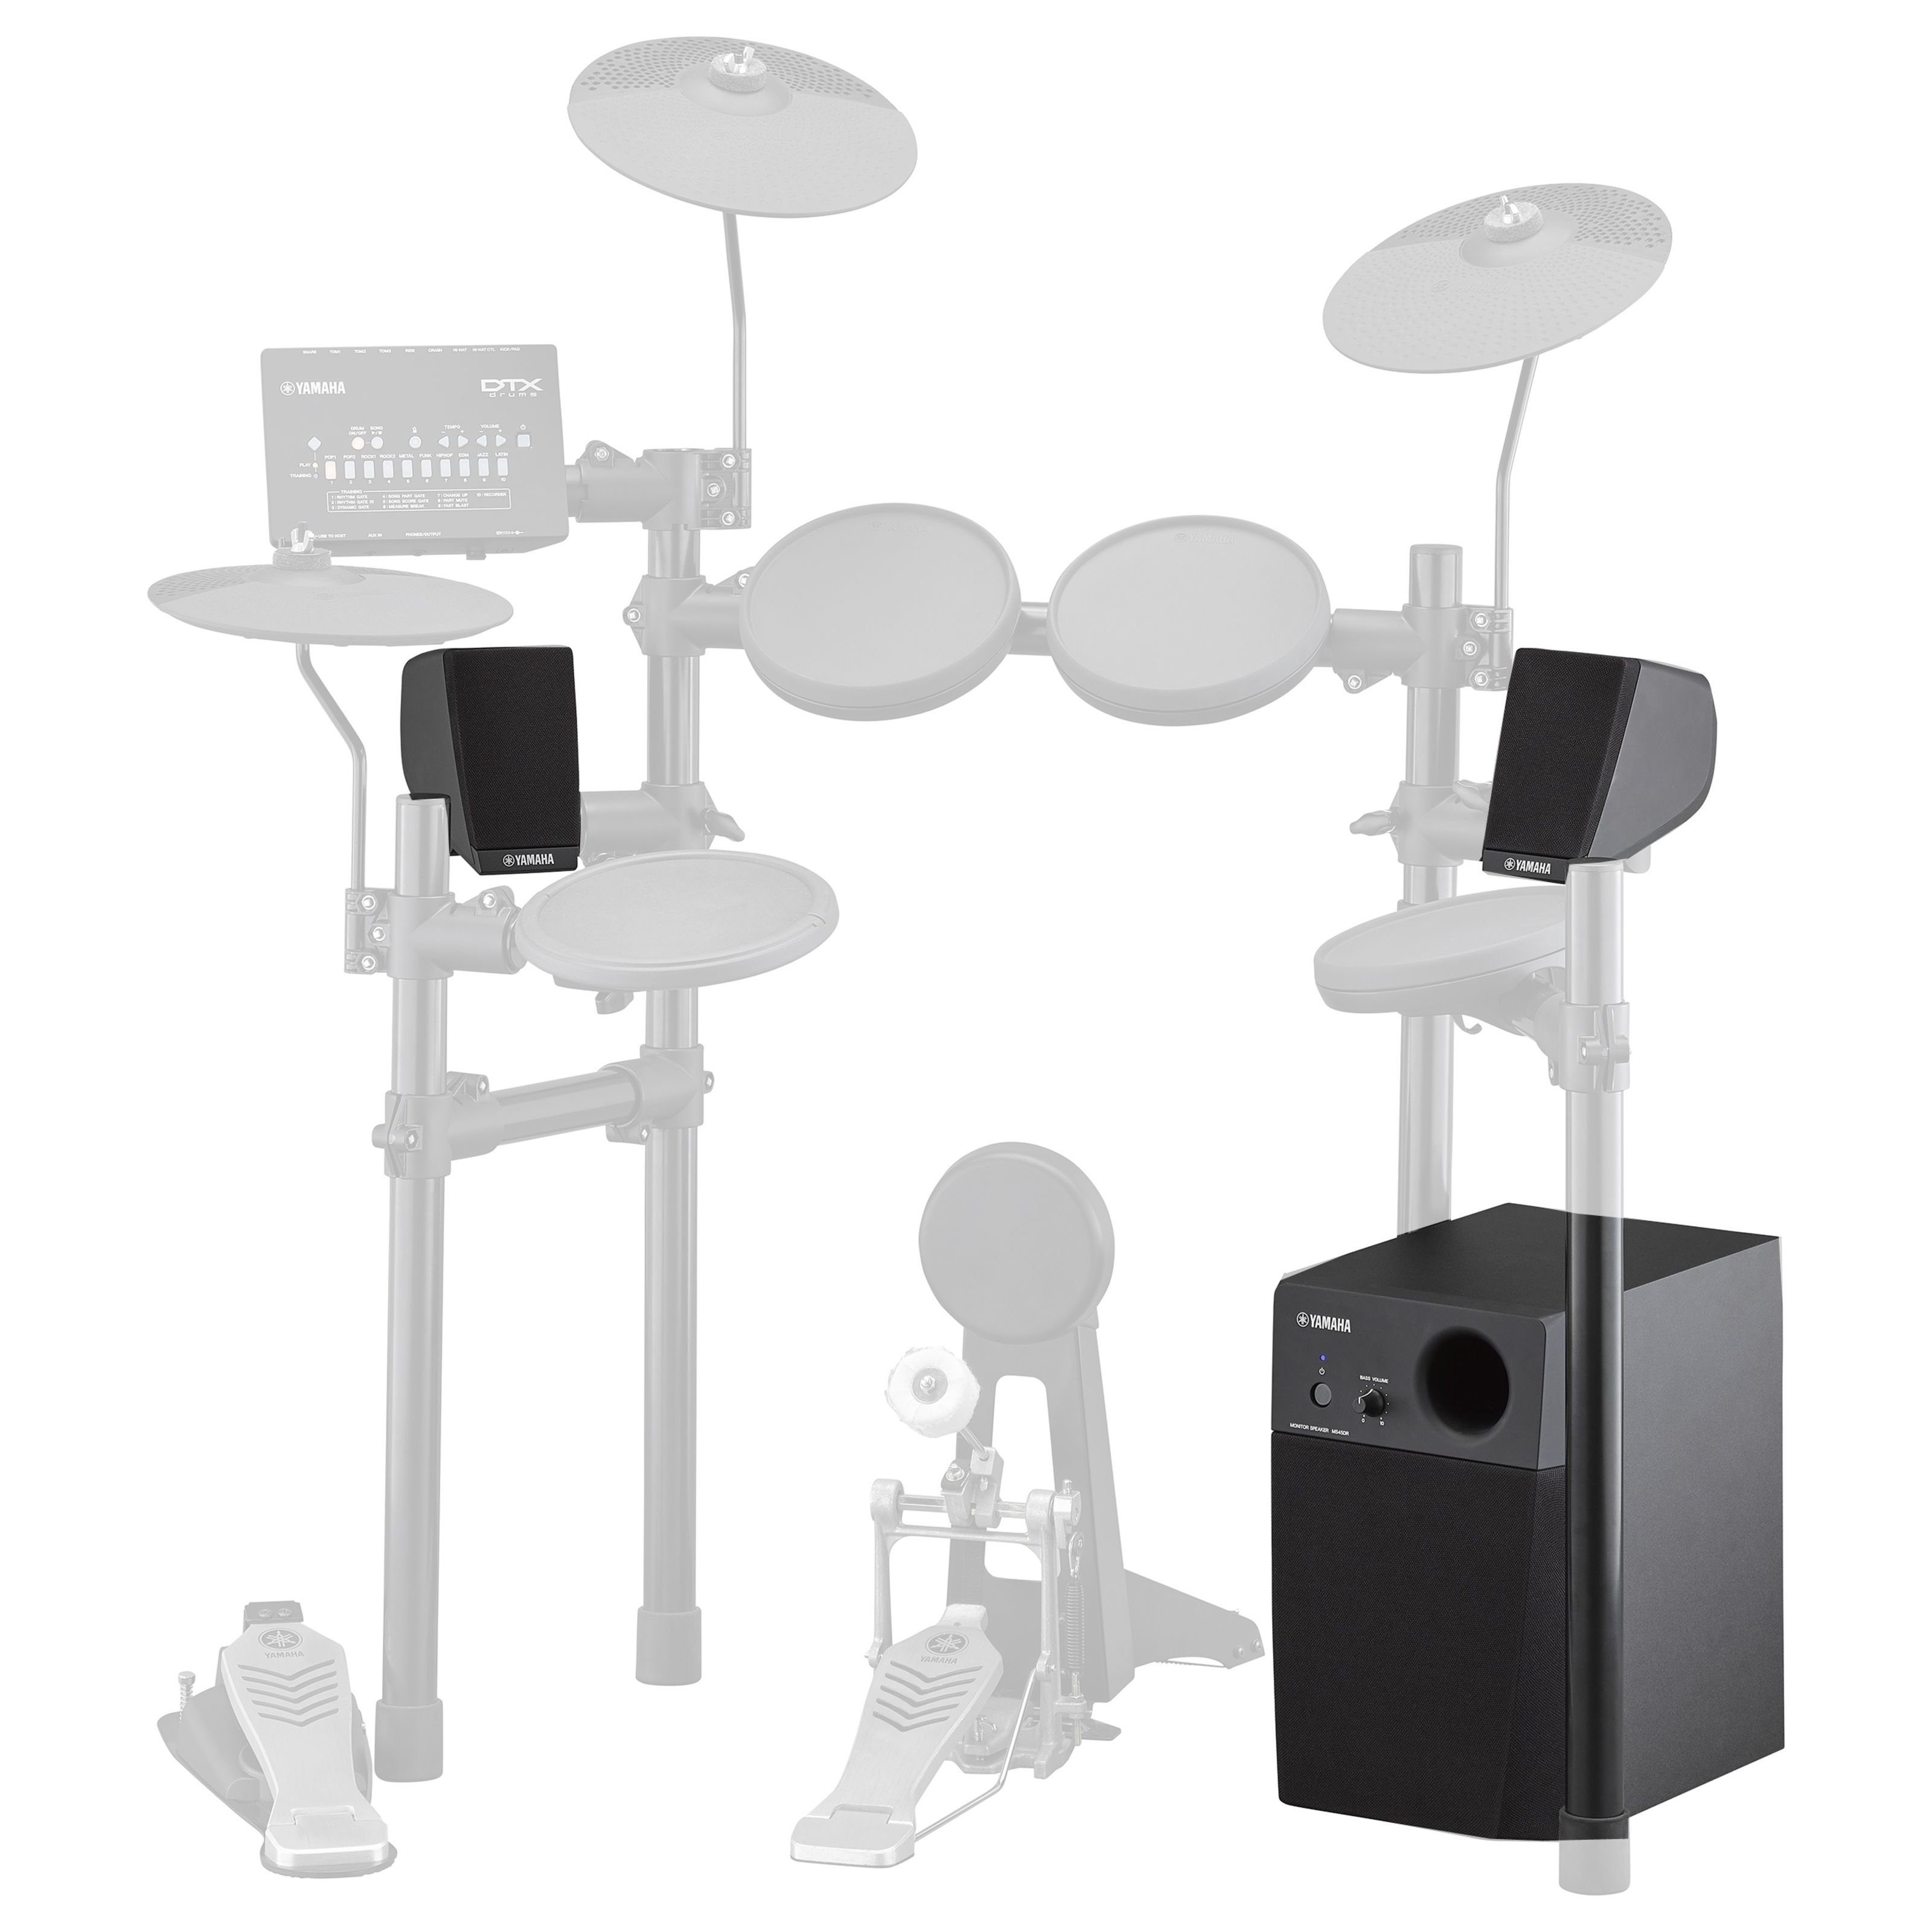 Spielzeug-Musikinstrument, System E-Drum E-Drum MS45DR - Monitor Yamaha Monitor